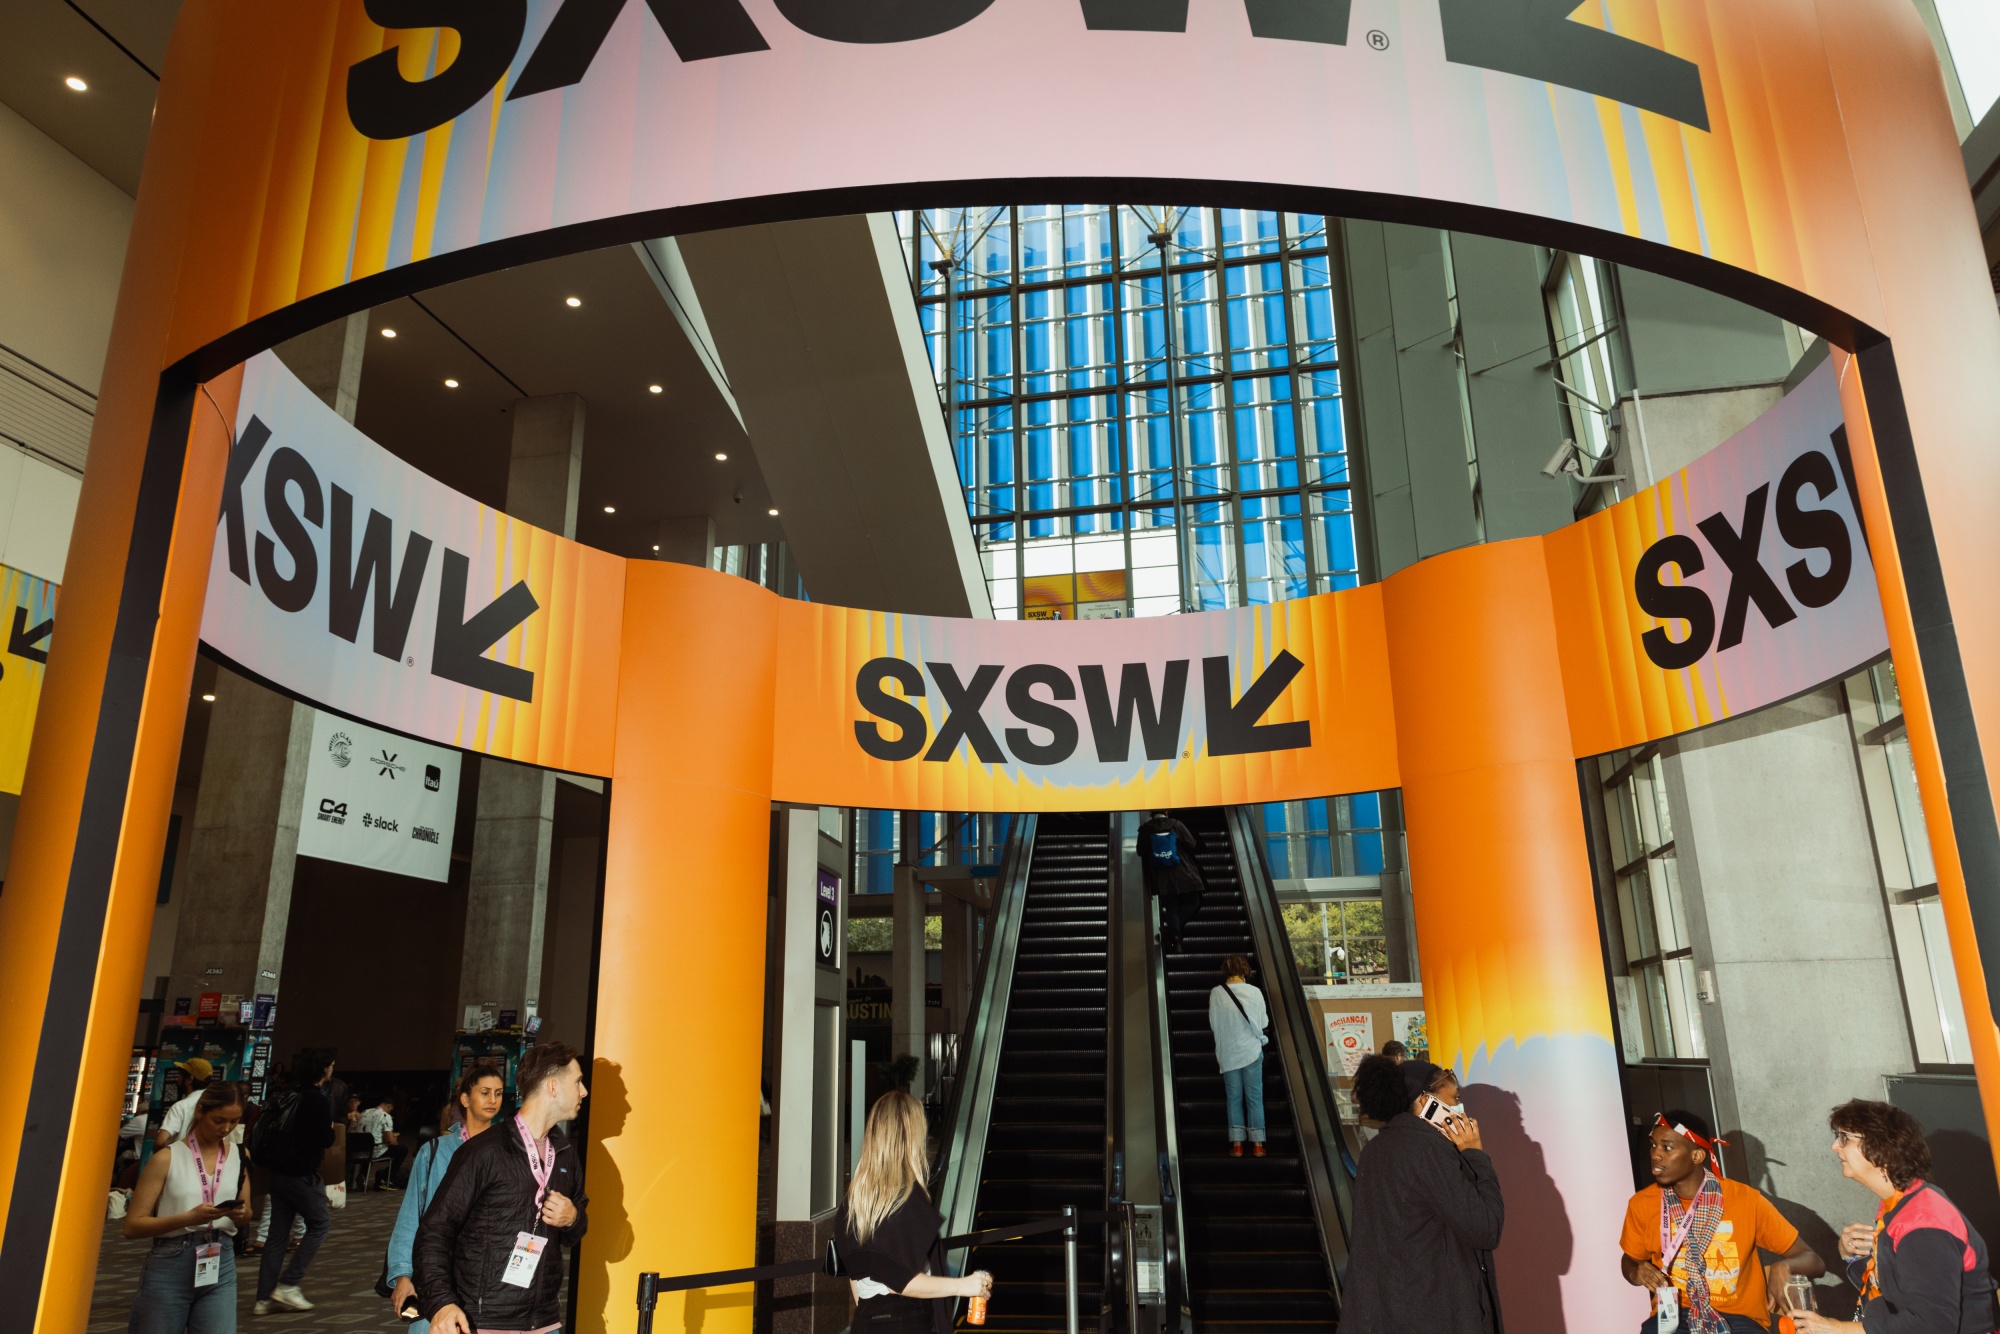 Attendees at the South by Southwest (SXSW) festival in Austin